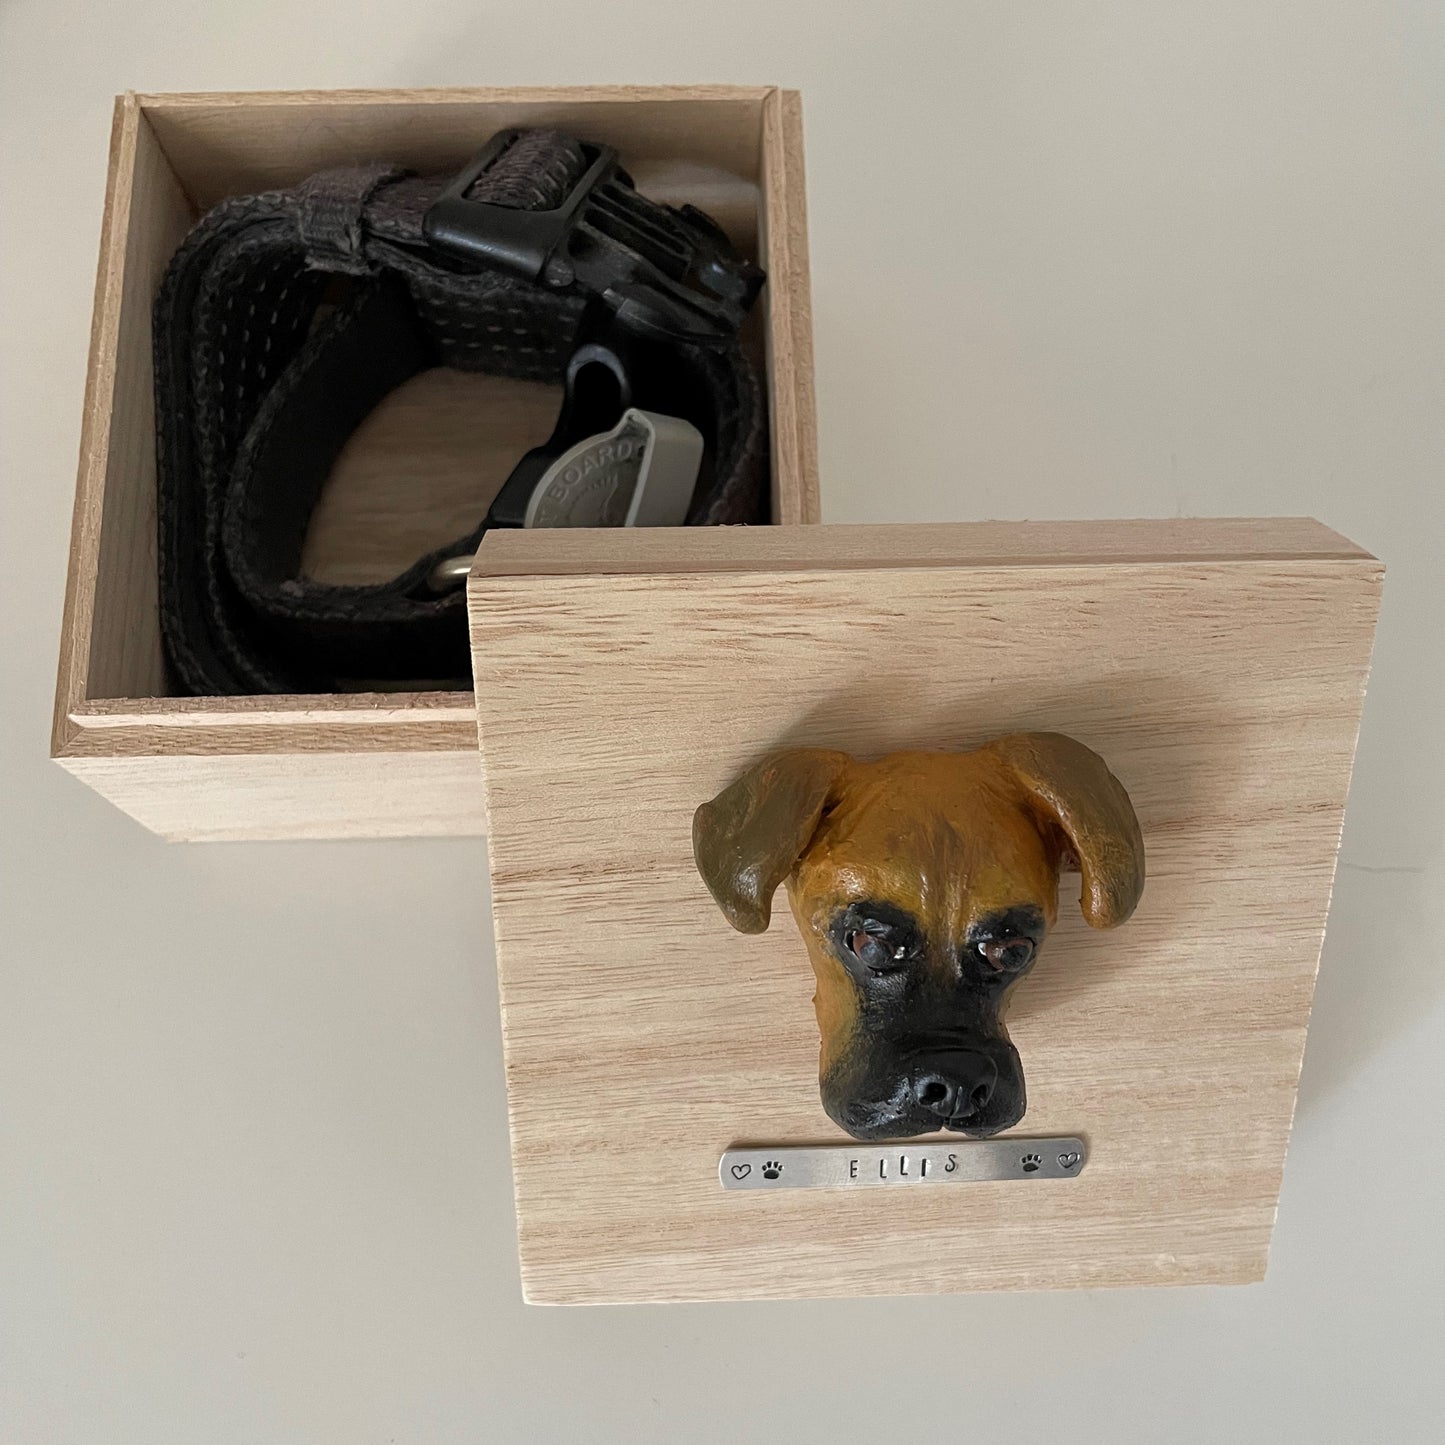 Custom timber pet memorial keepsake box with handscultped dog face on the lid, with a name plaque reading Ellis. Box is open showing collar being stored within,